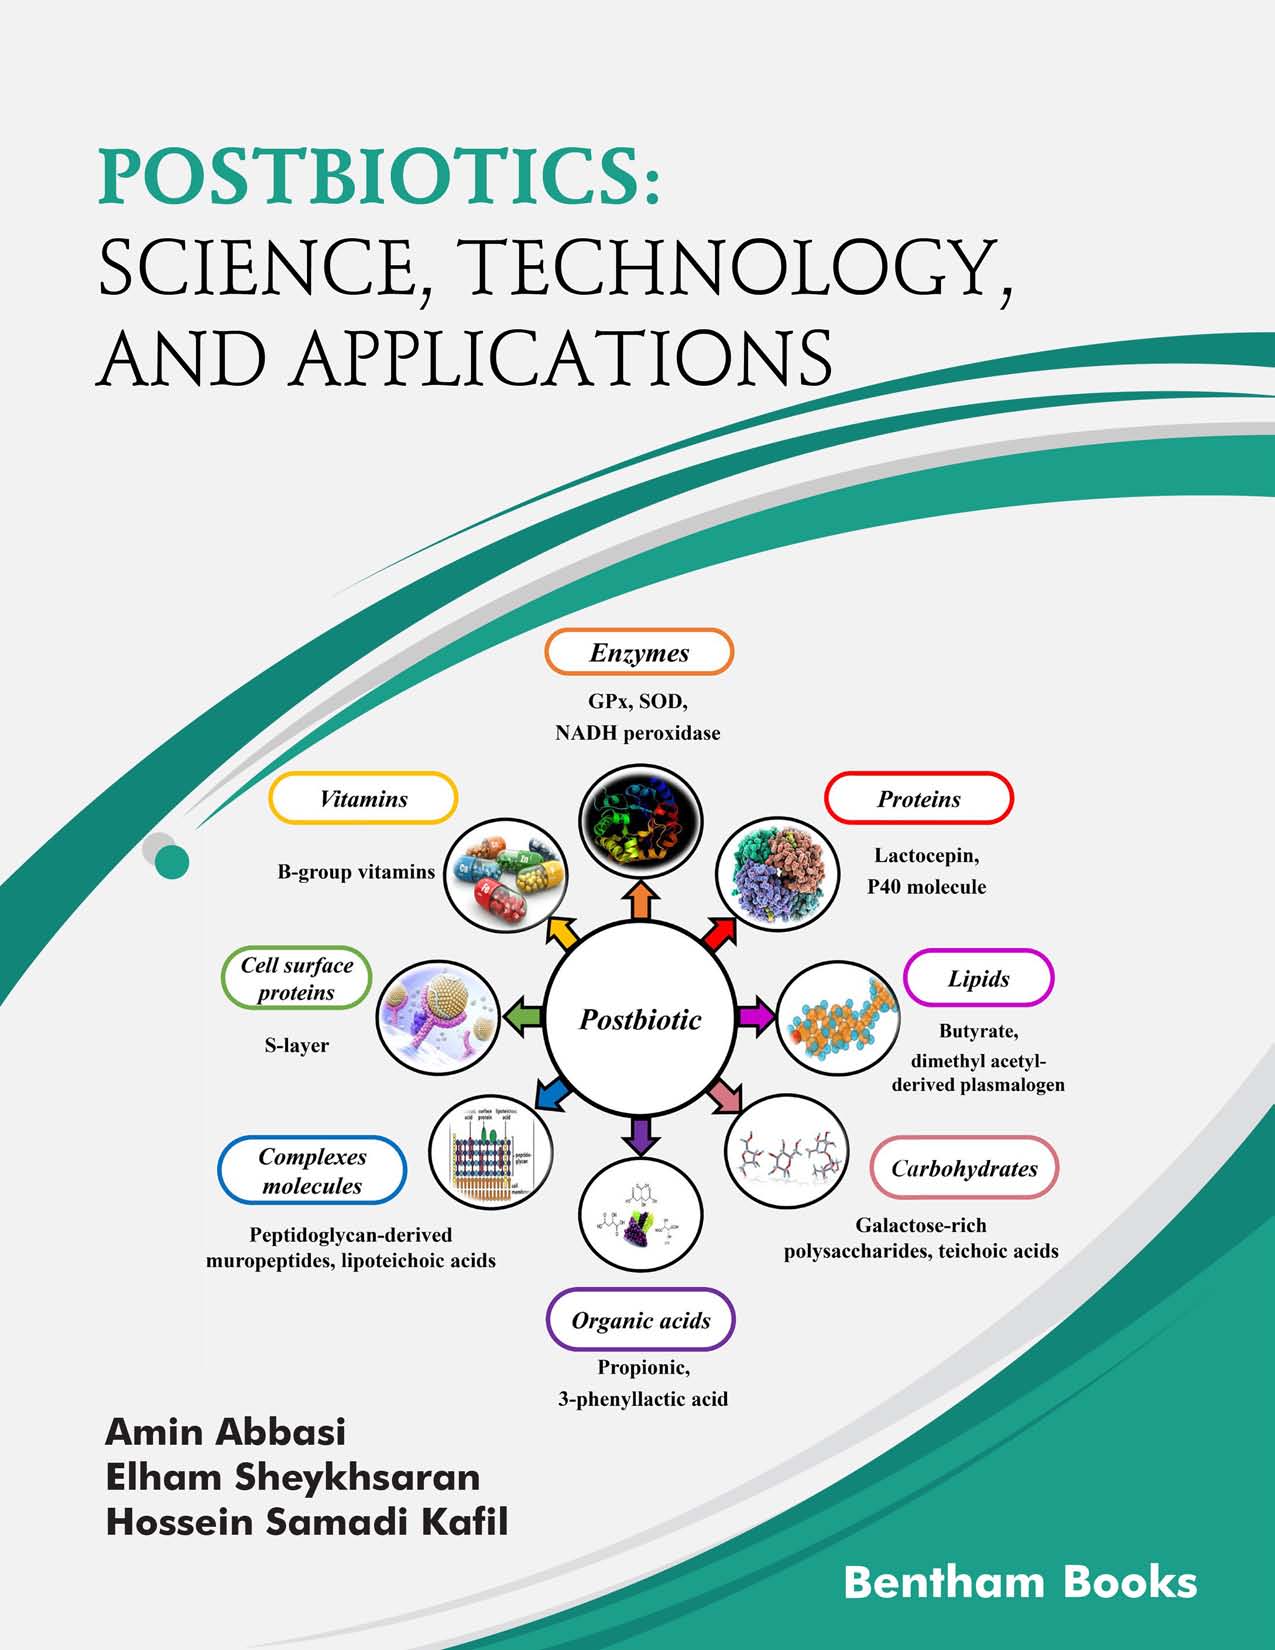 Postbiotics: Science, Technology and Applications